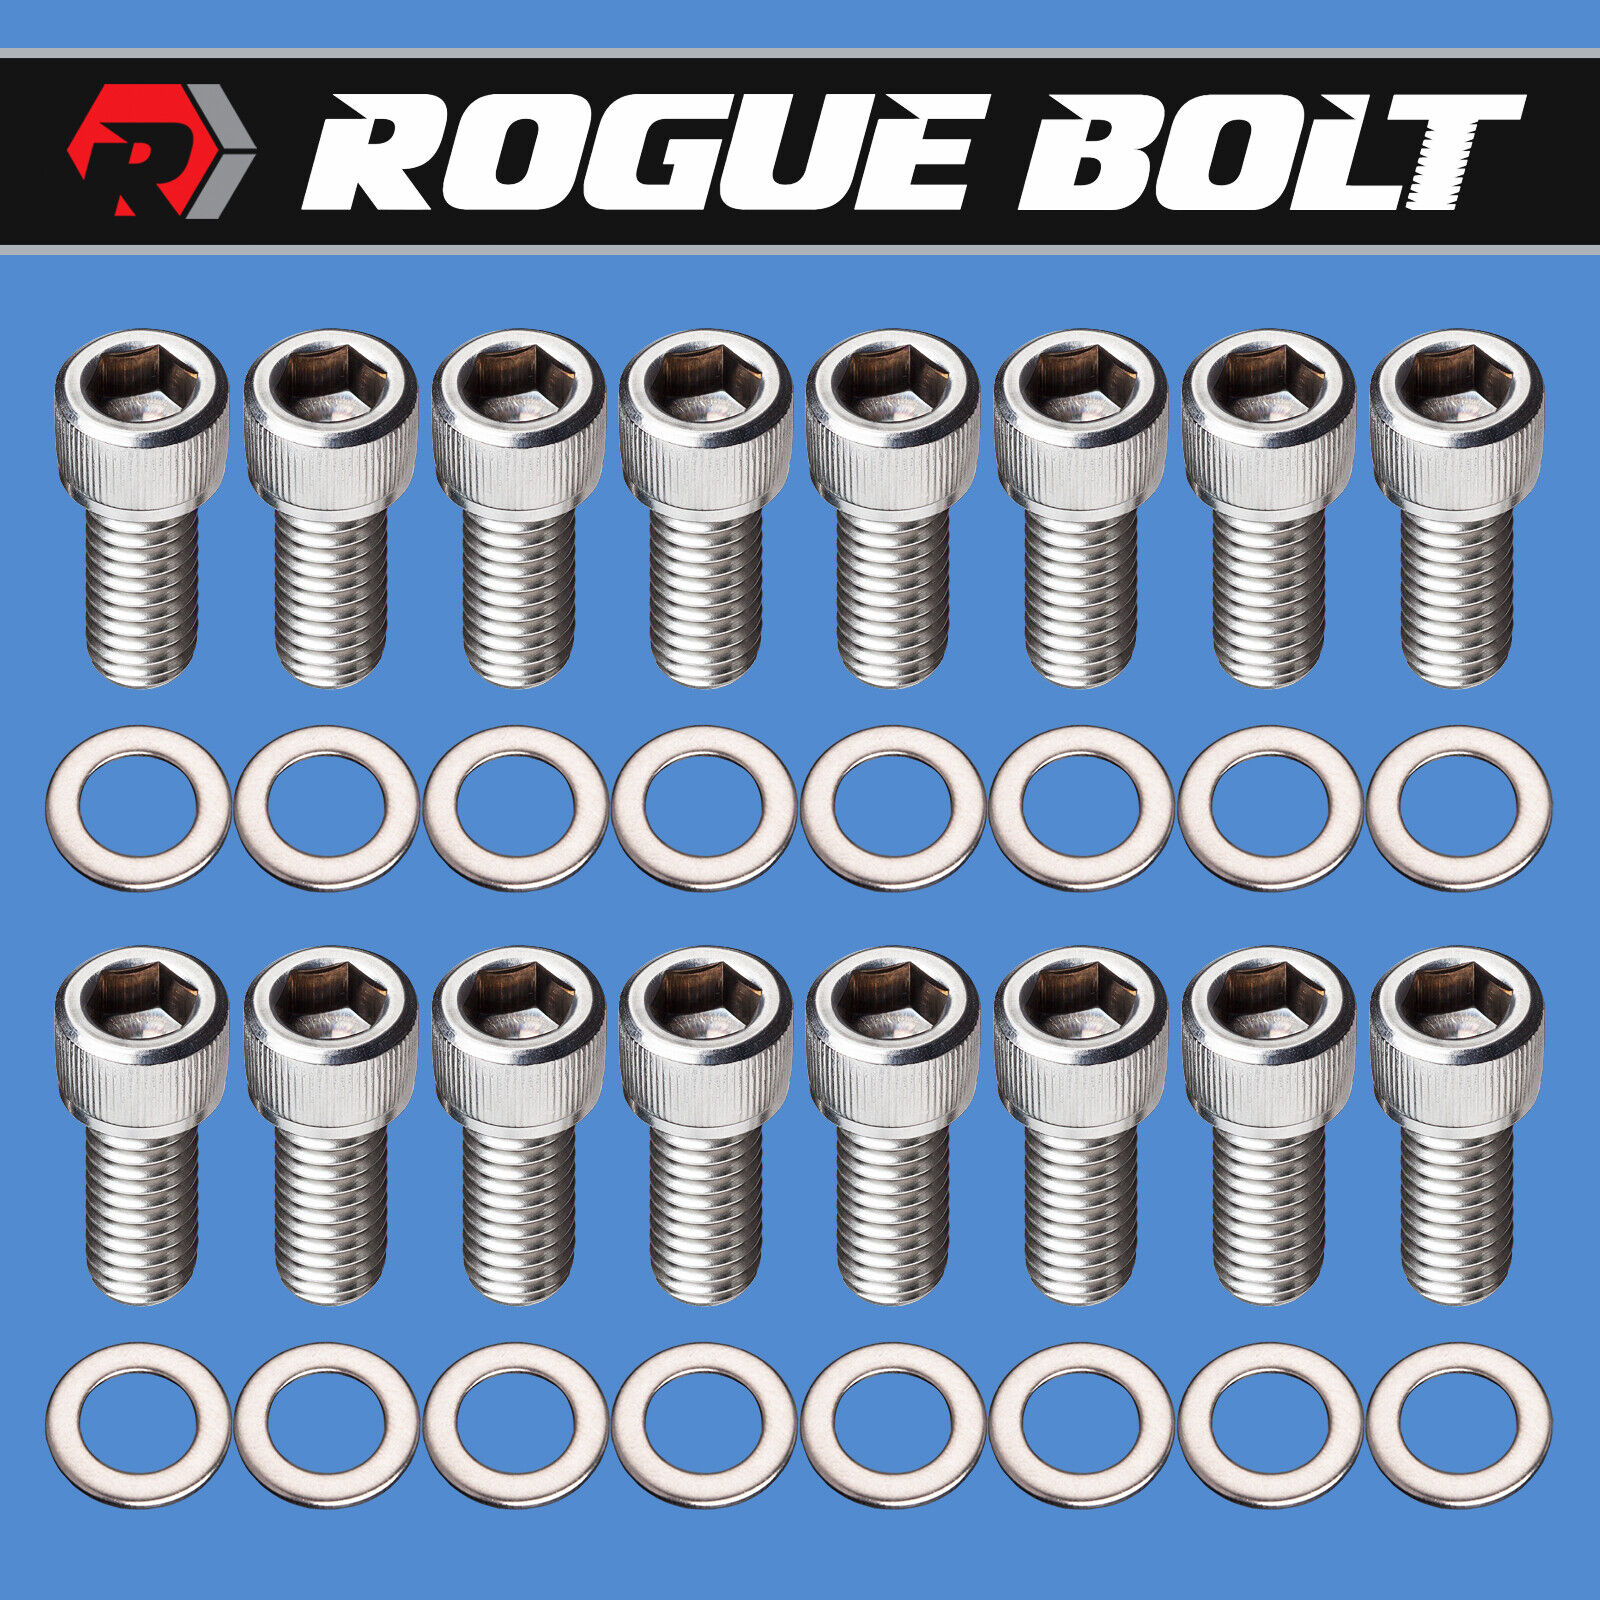 SBF HEADER BOLTS STAINLESS STEEL KIT SMALL BLOCK FORD 260 289 302 351W 351C 5.0L